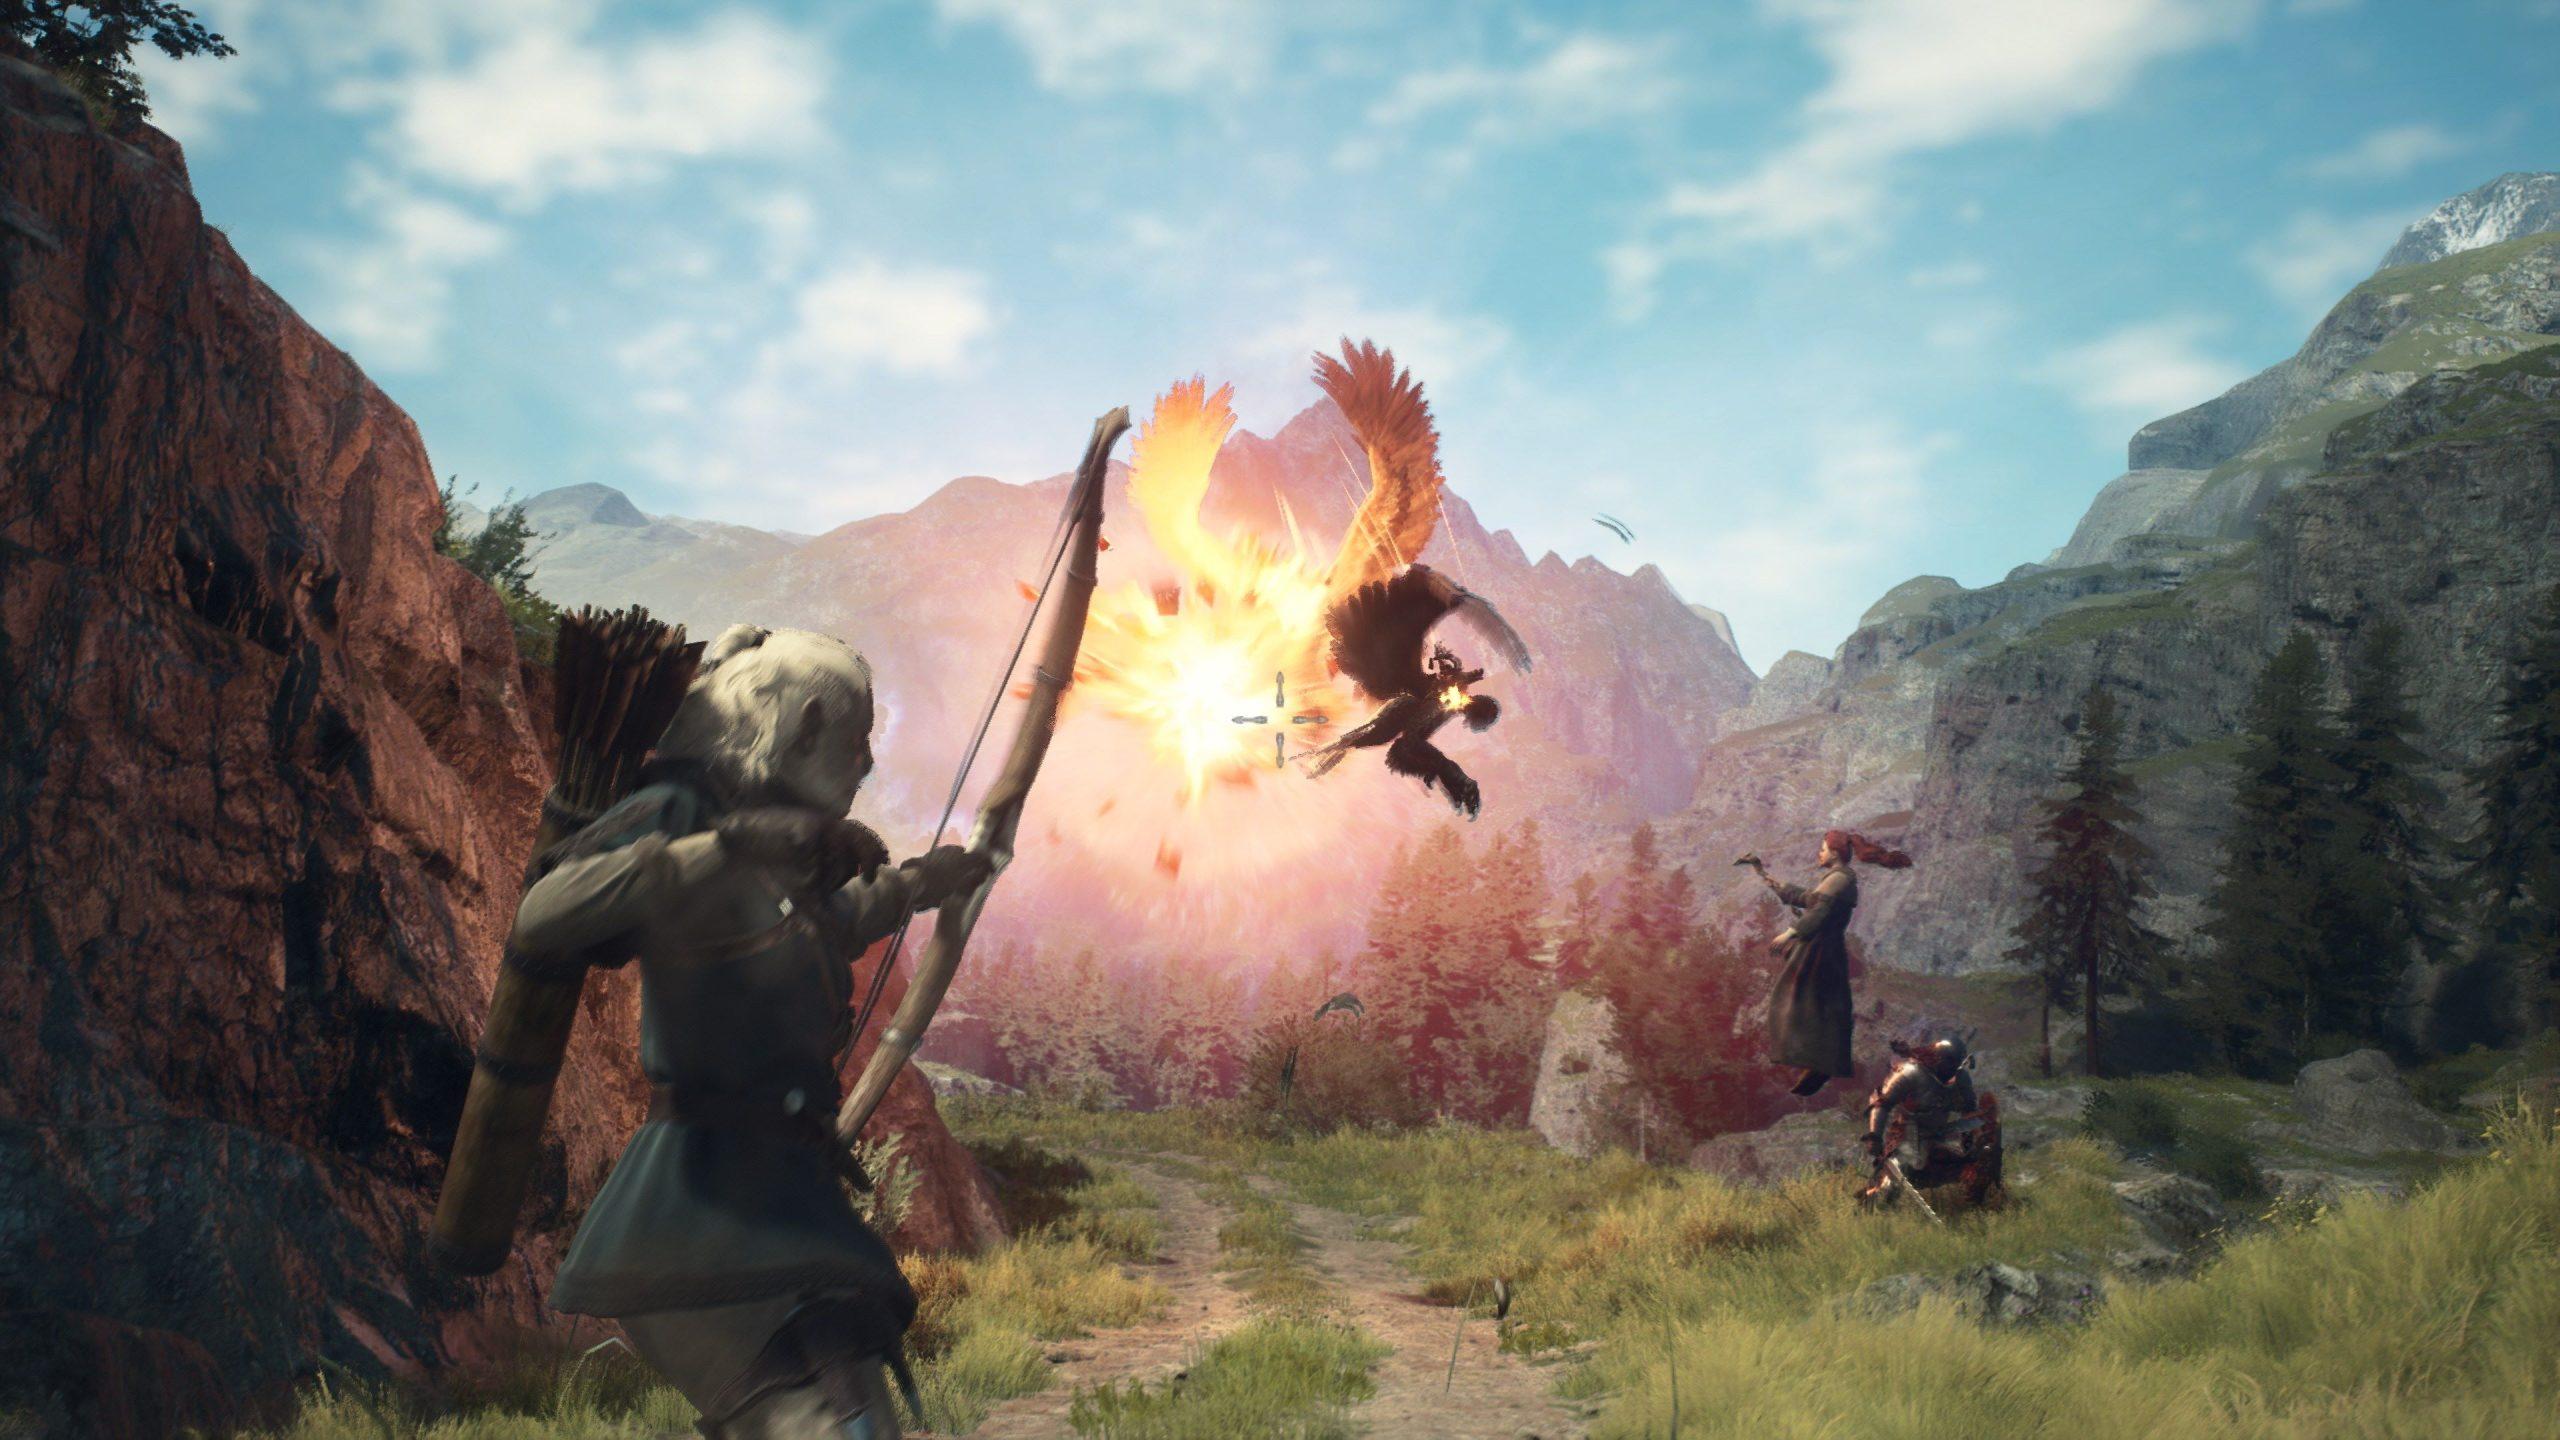 Dragon's Dogma 2 Showcase Announced, Featuring New Gameplay and Reveals